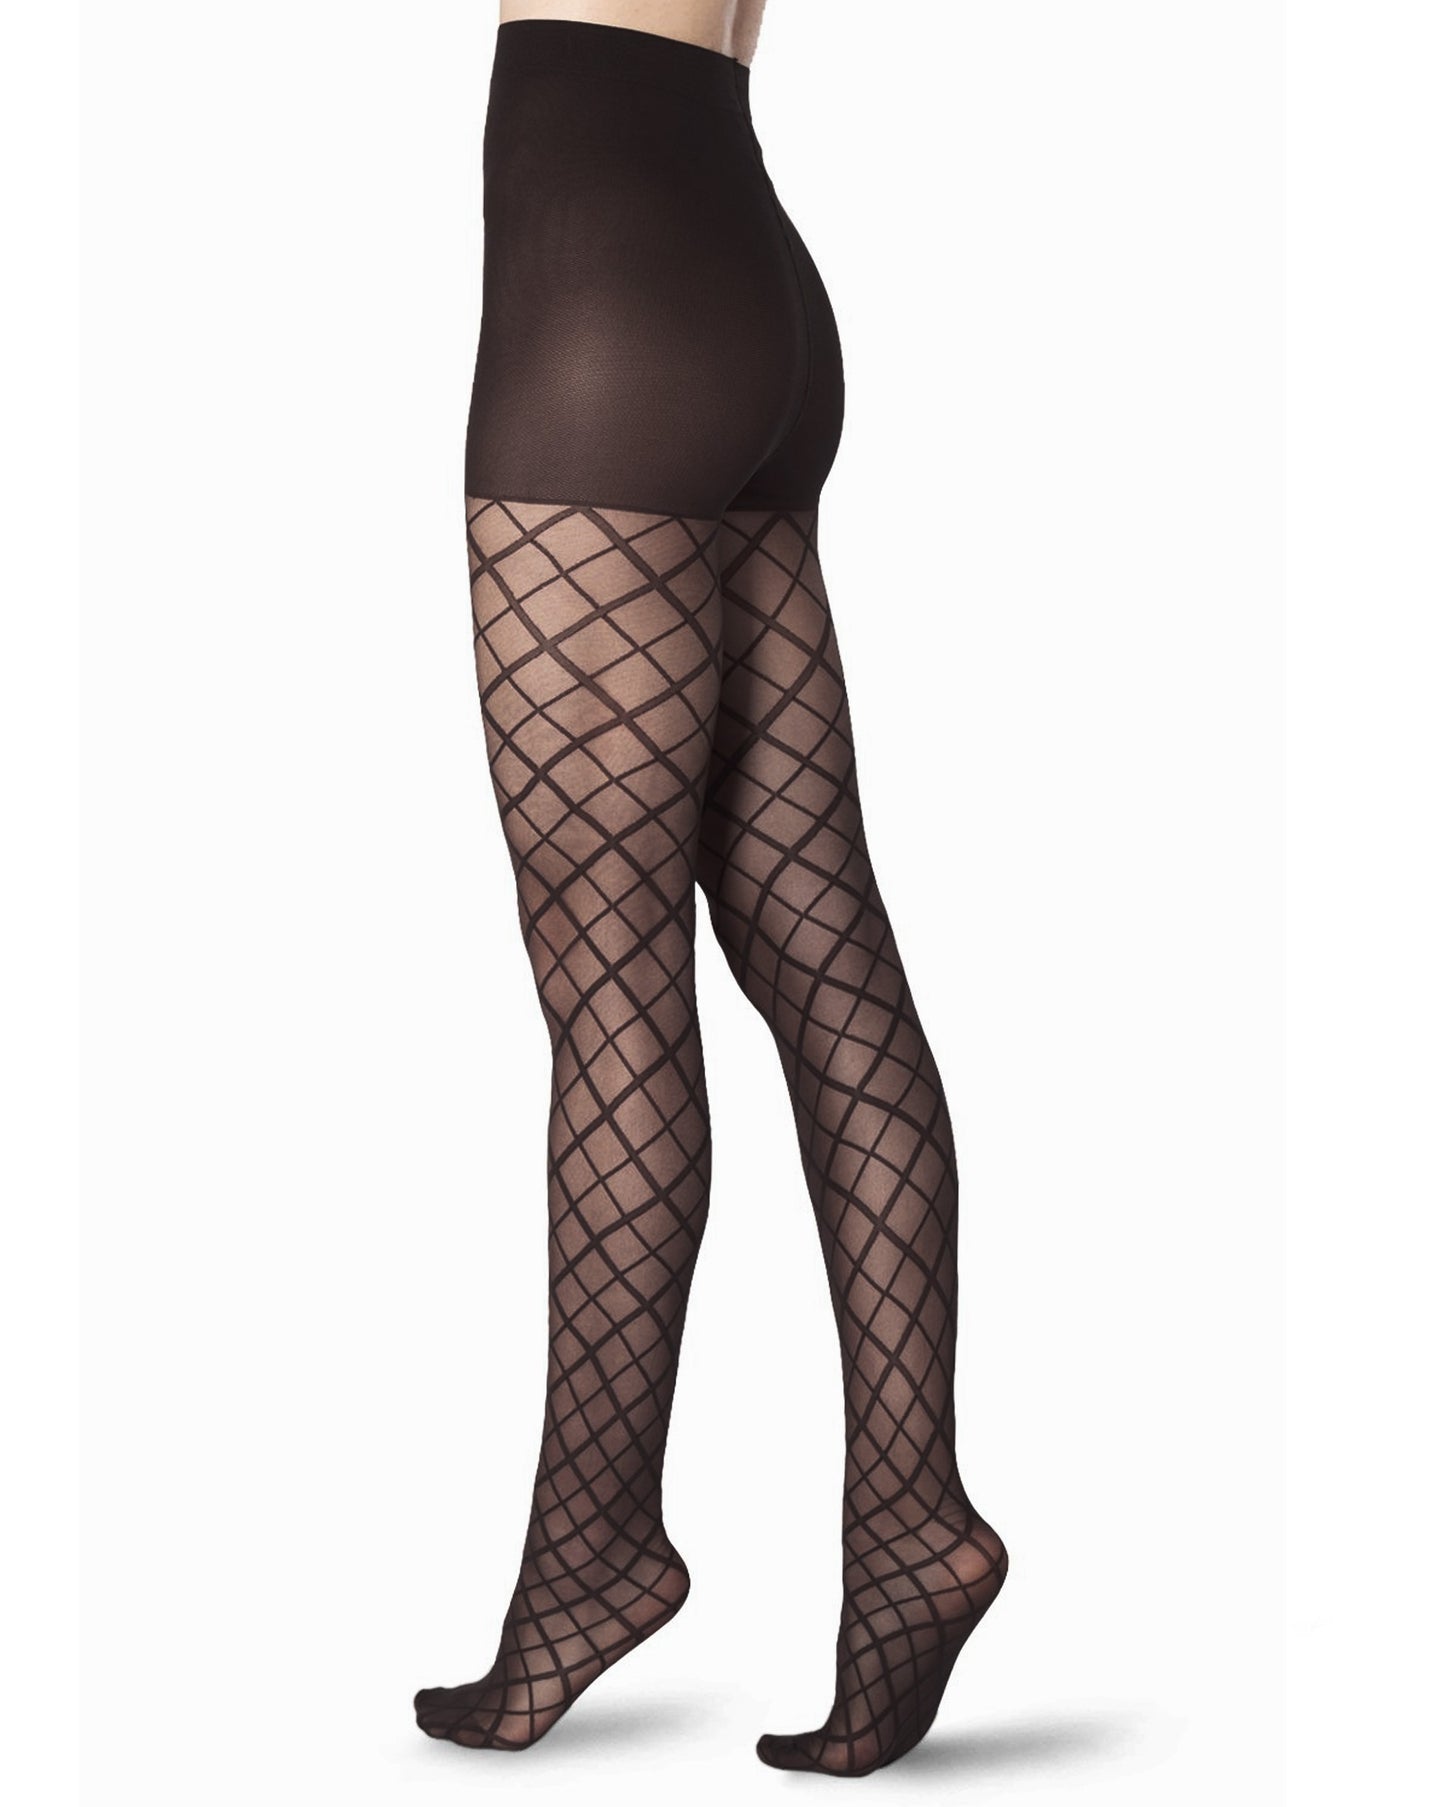 Sheer black fashion tights with a simple argyle pattern, boxer top, flat seams, gusset and reinforced toe.